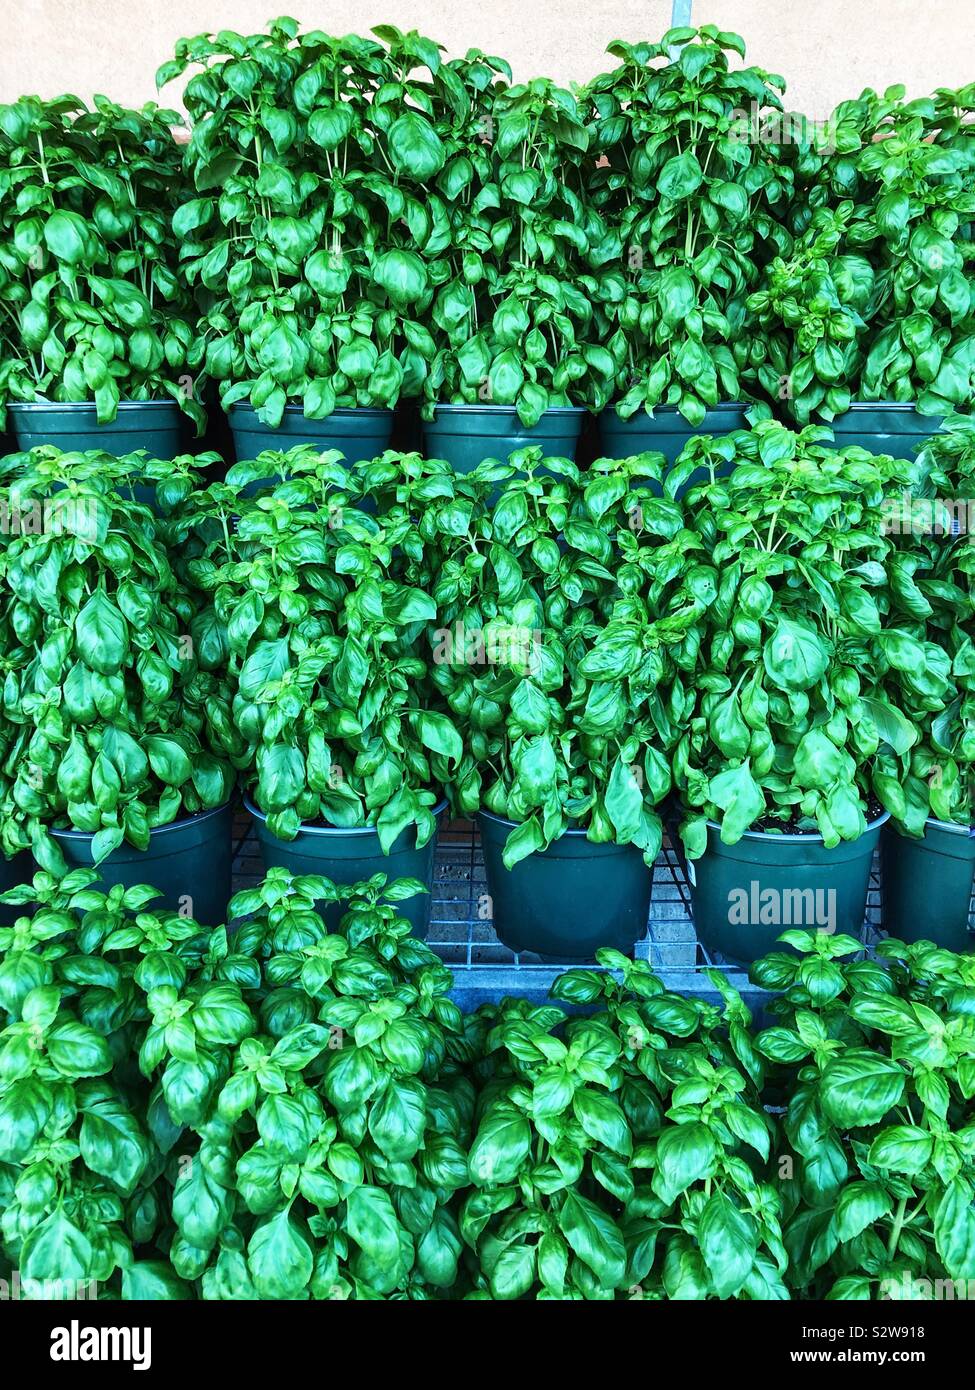 Rows of bushy, healthy, fresh basil plants for sale at the market Stock Photo